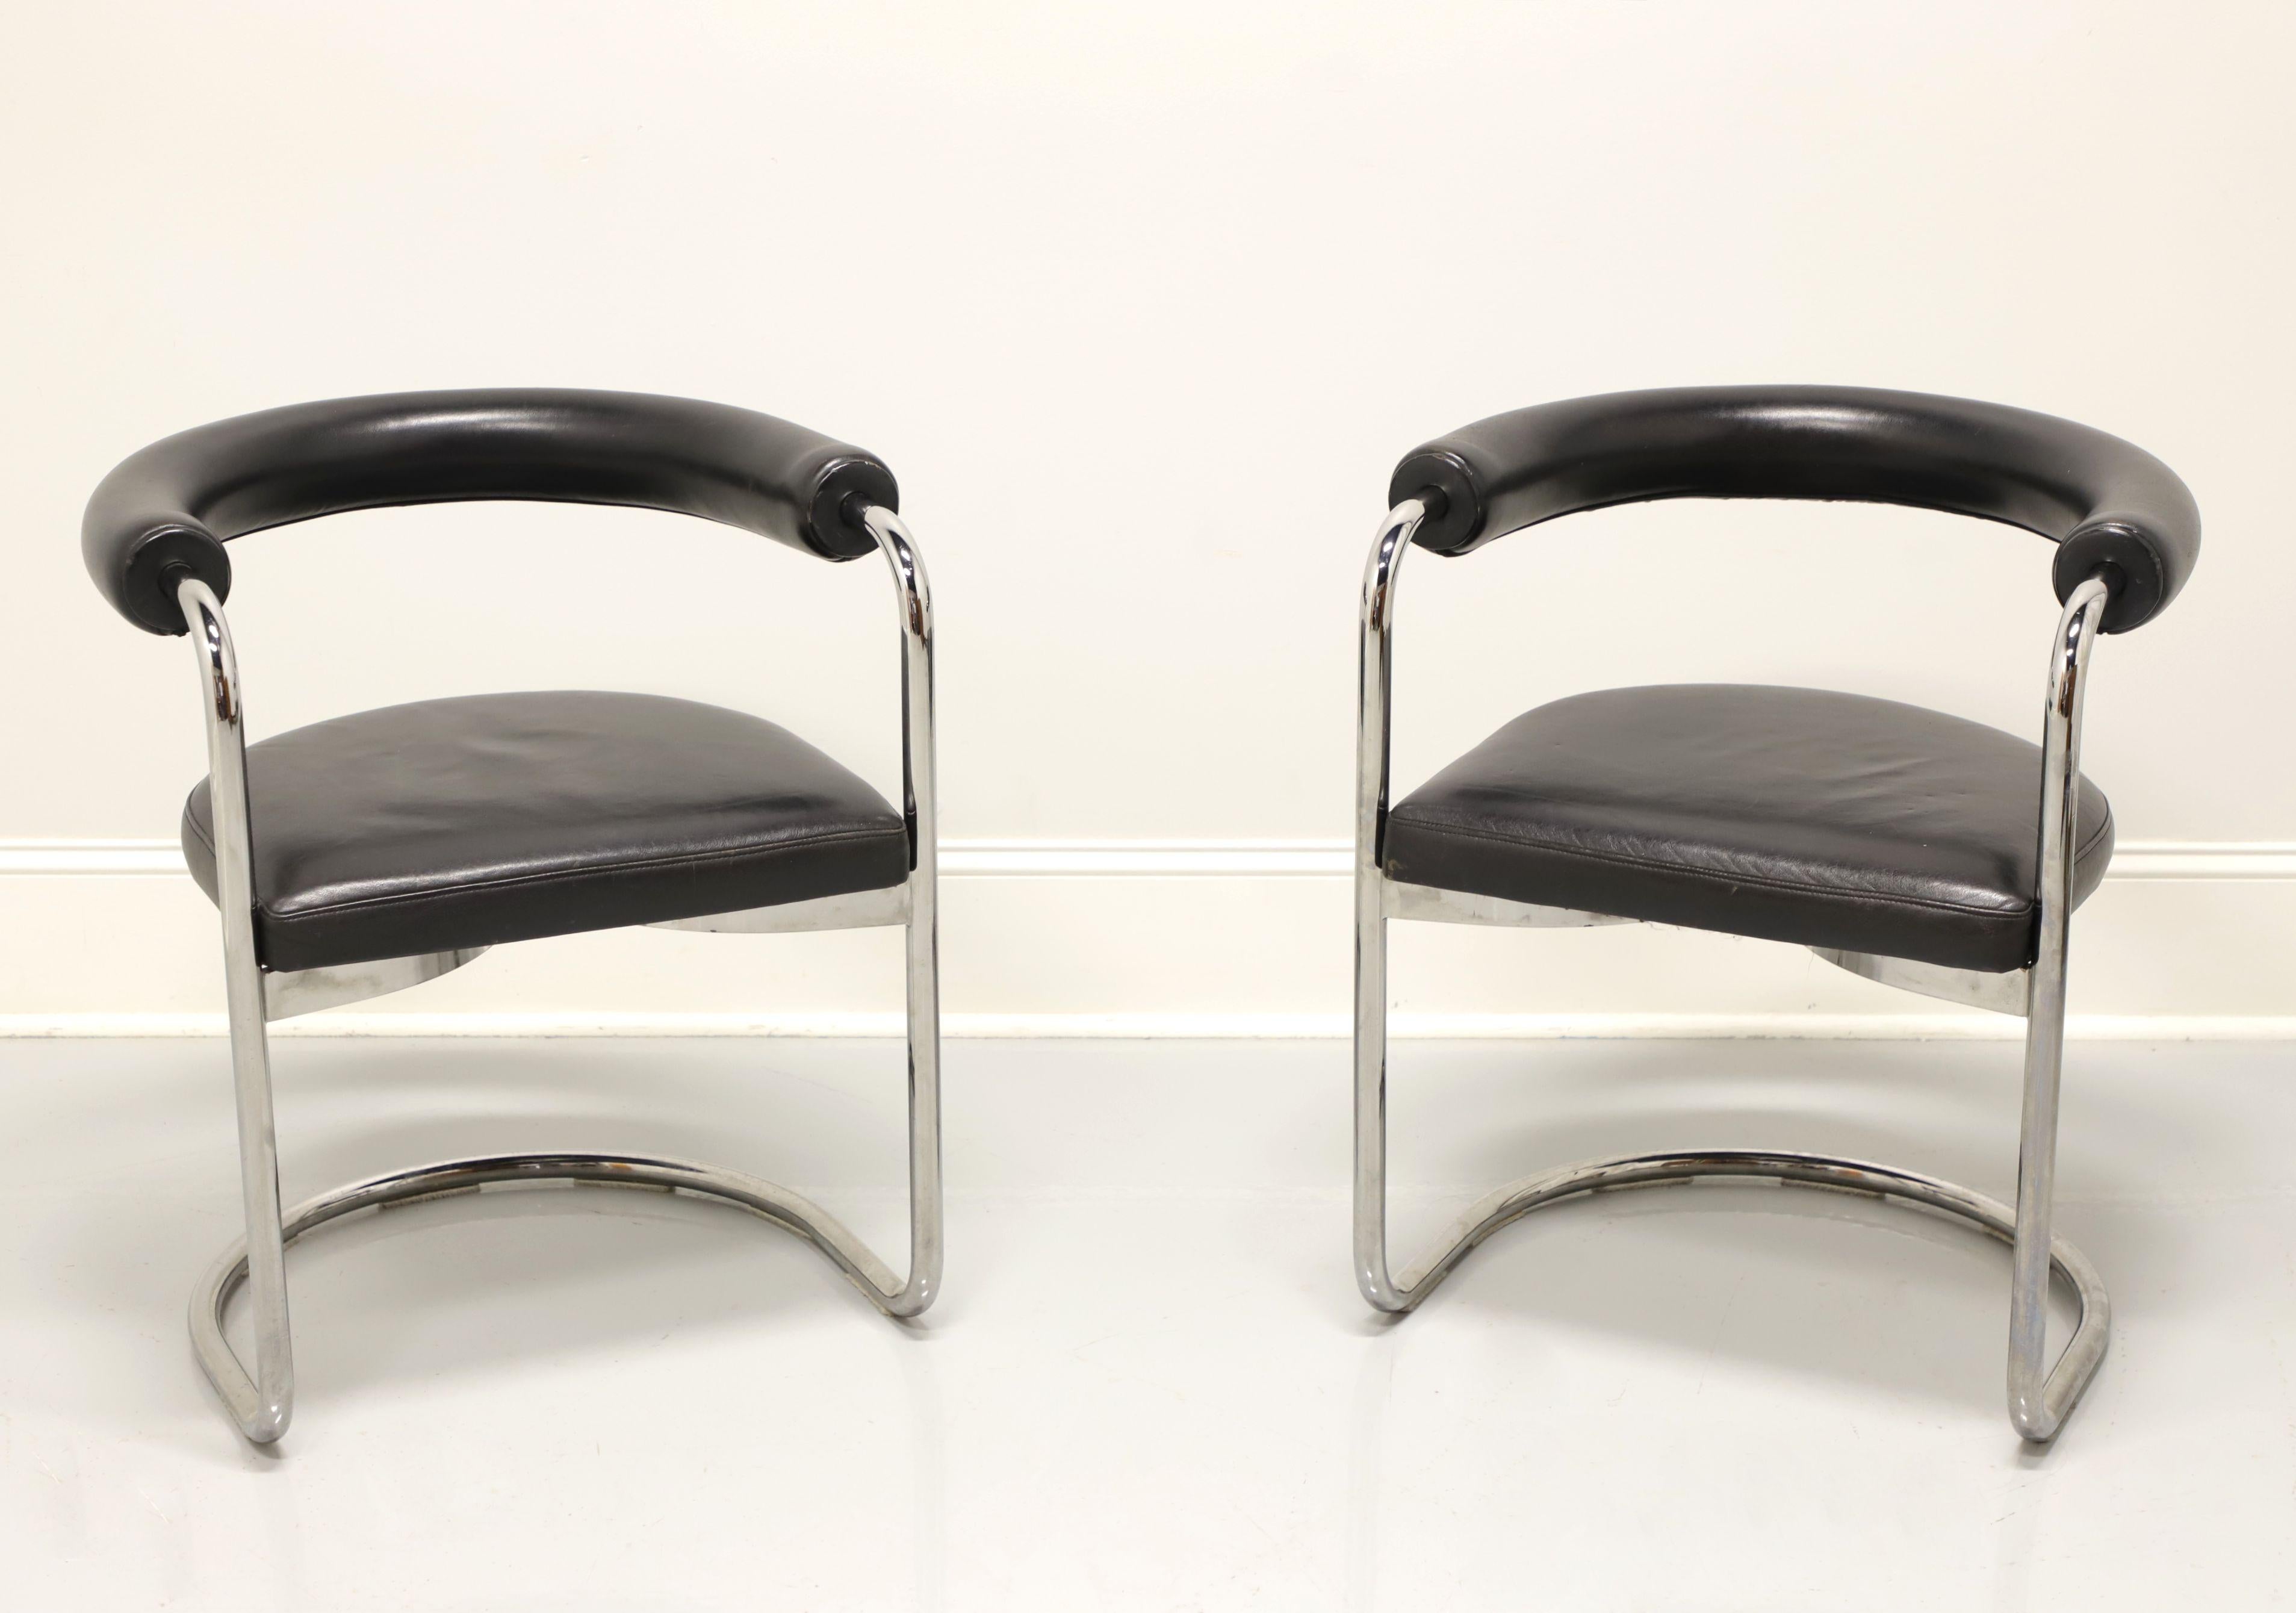 STENDIG Tubular Steel Cantilever Chairs - Pair 2